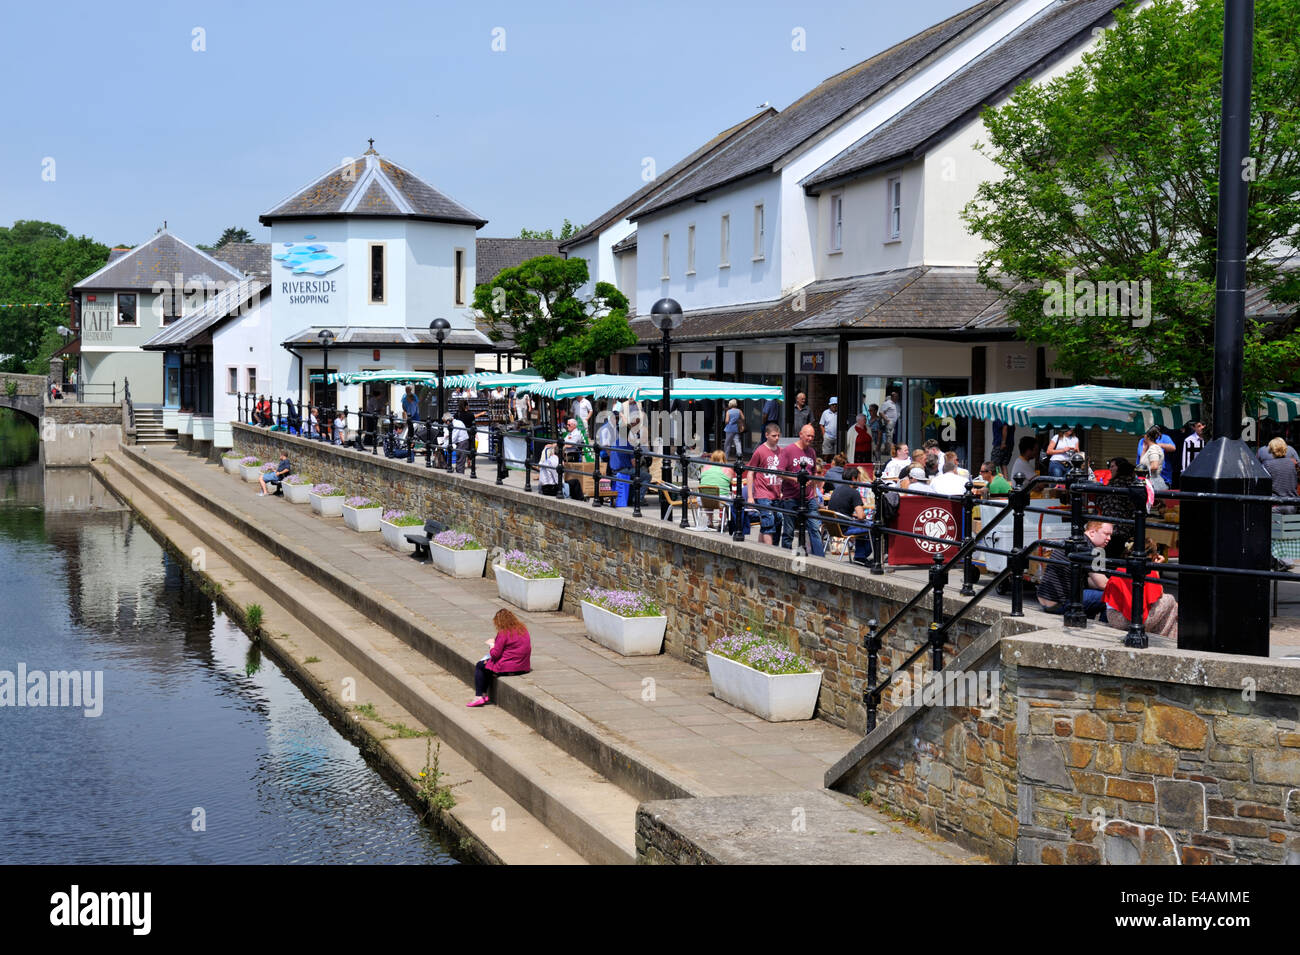 Riverside shopping centre Haverfordwest outdoor market and river Cleddau, Wales Stock Photo